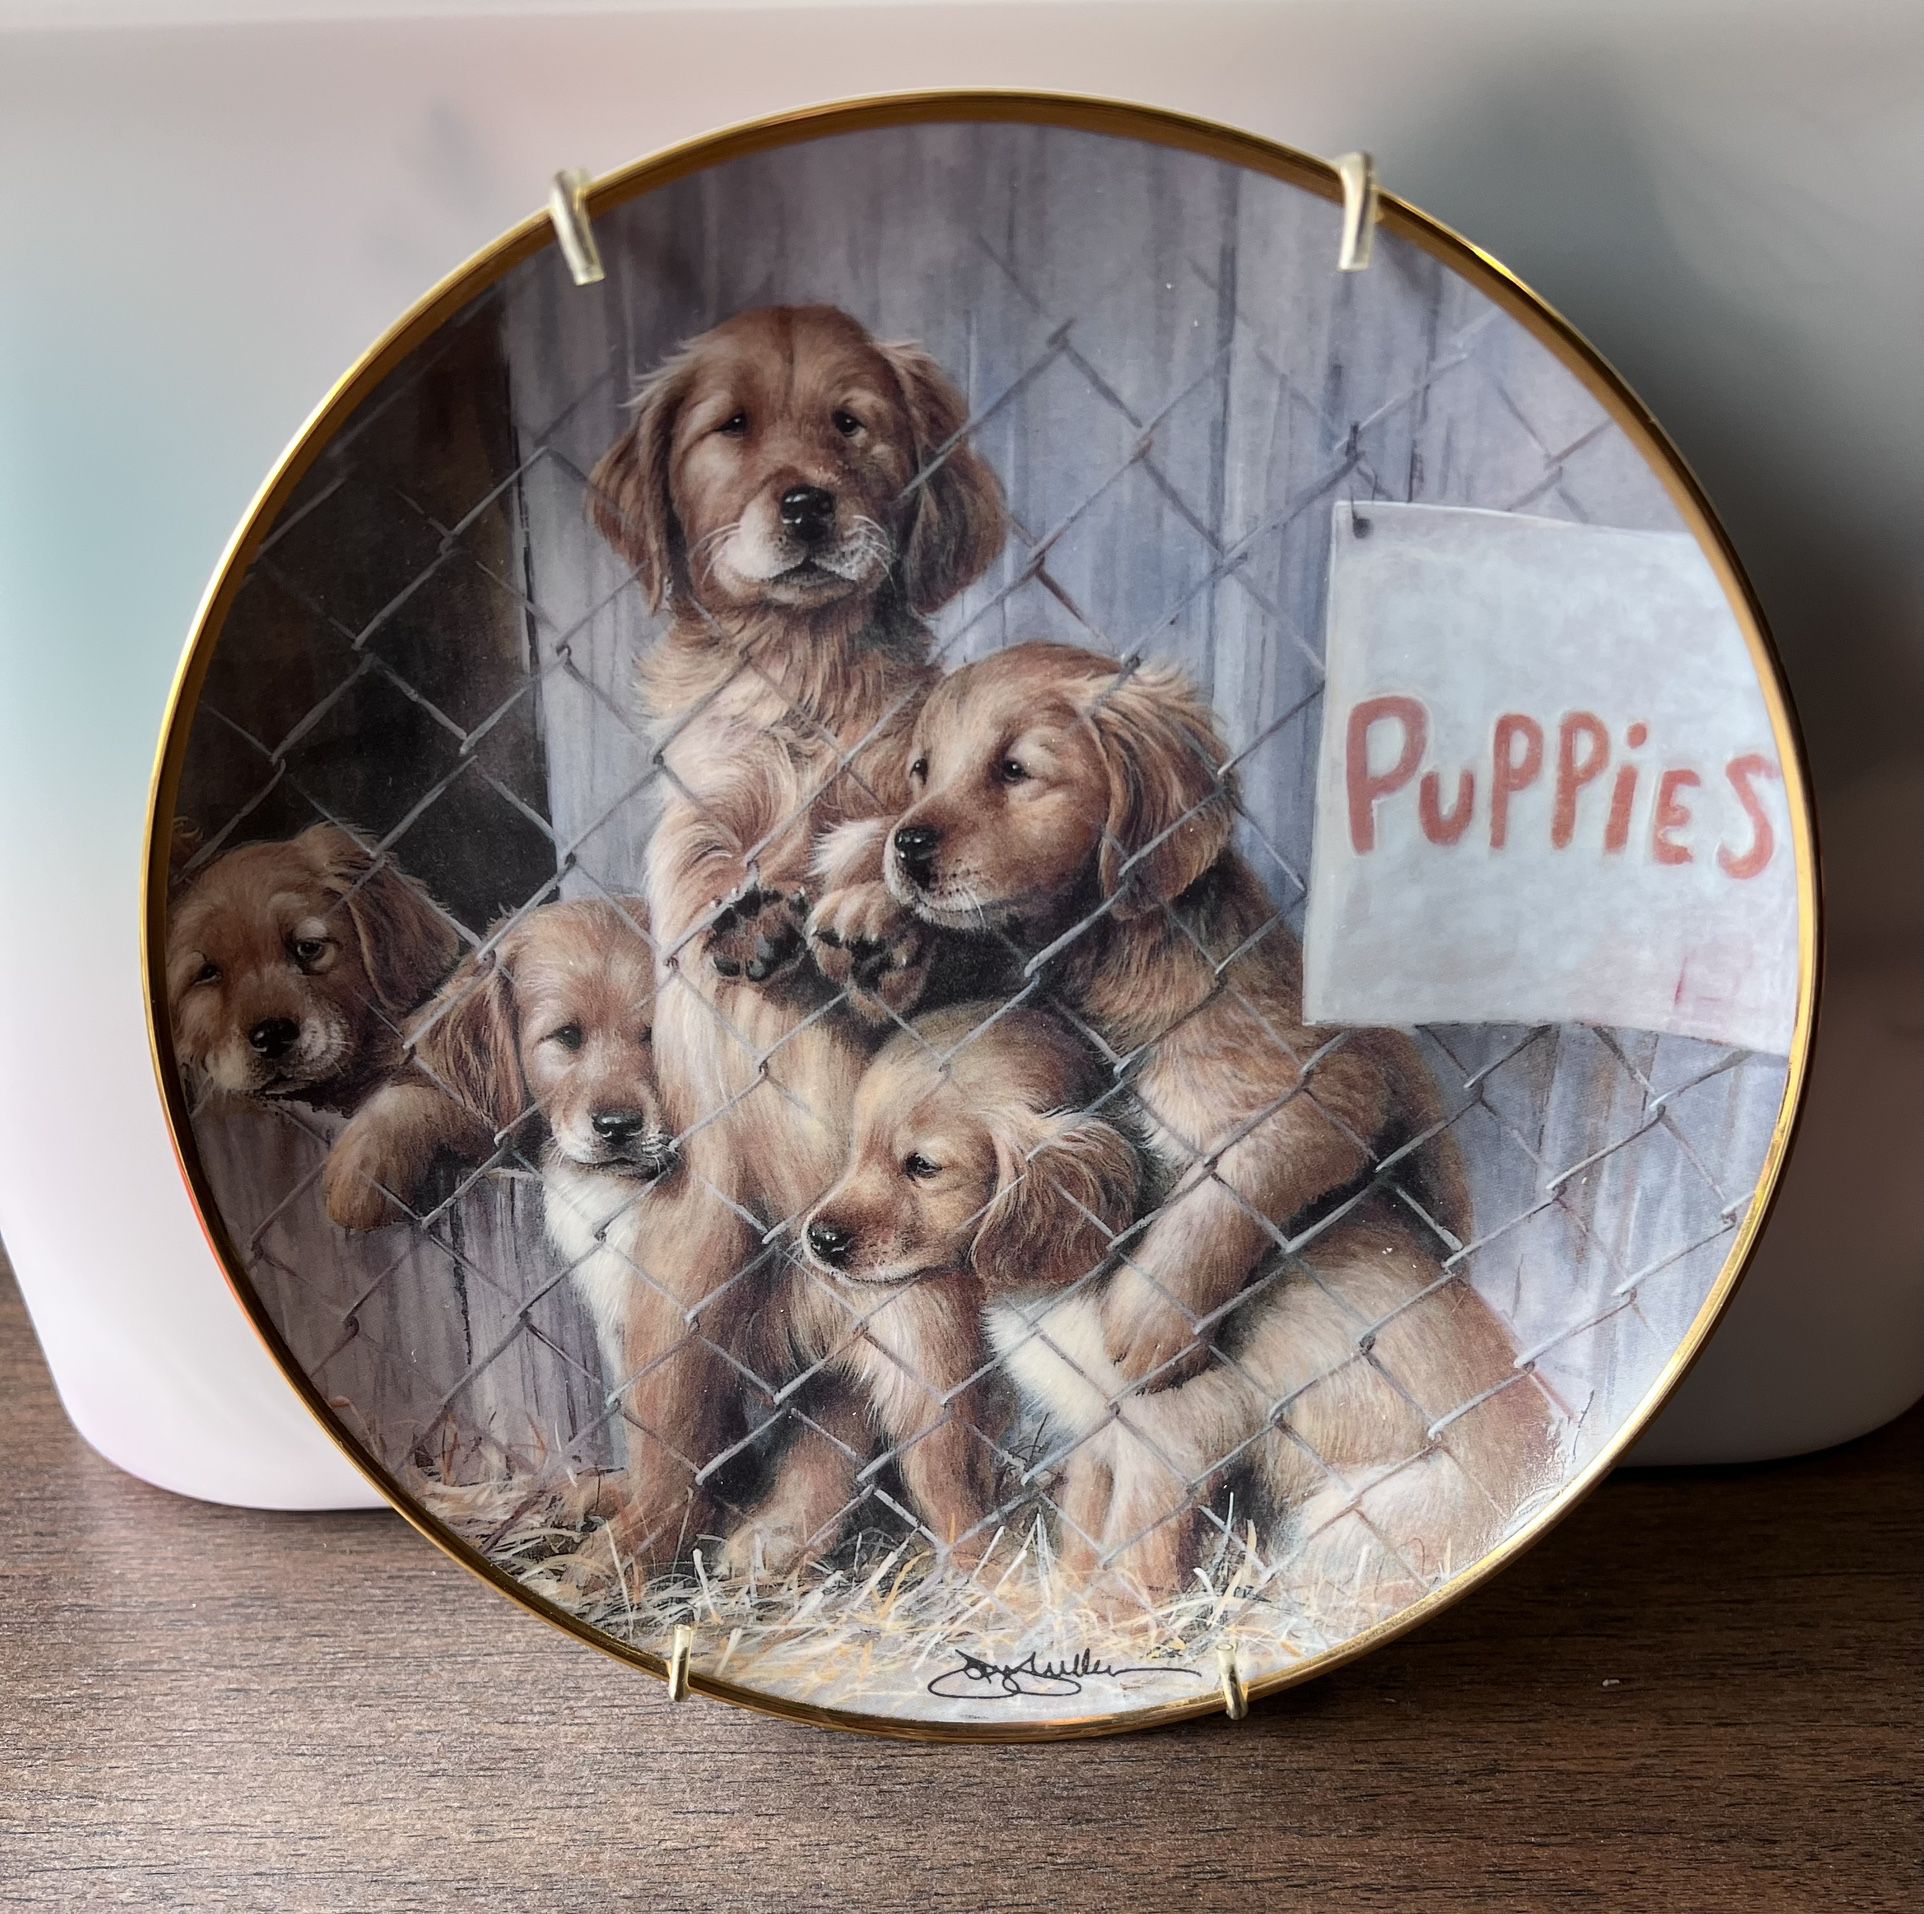 Puppies Collectible Plate